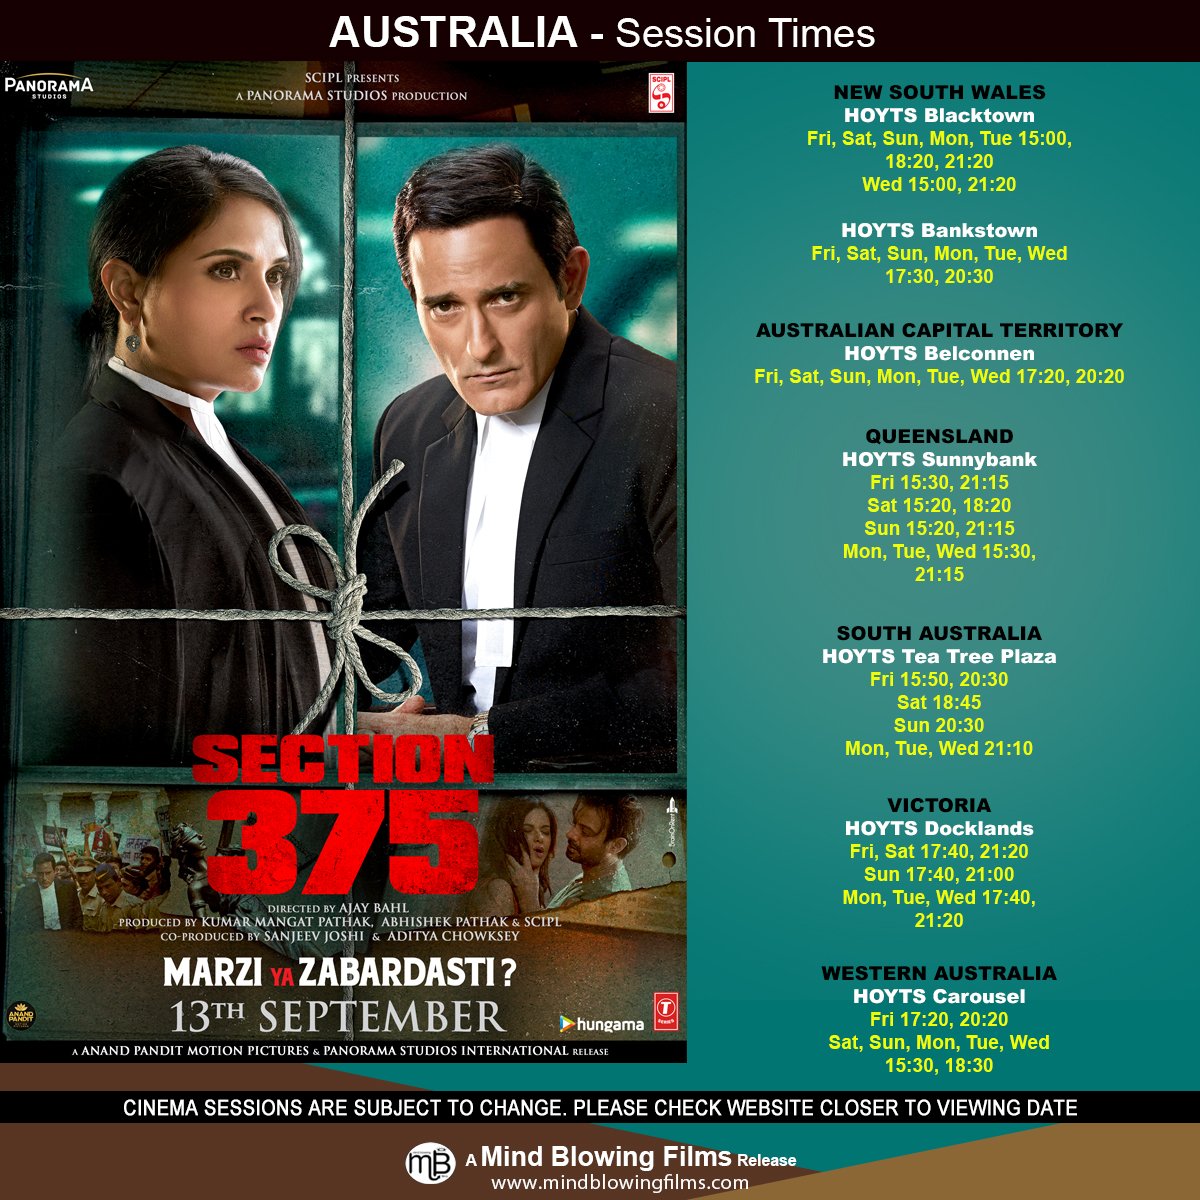 Mind Blowing Films On Twitter Book Tickets Now To Watch The Ultimate Courtroom Movie Section375 Starring Richachadha And Akshayekhanna On 13th September Sessiontimes Australia Book On Hoyts Australia Https T Co 1p6m9i5gij Who Will Win